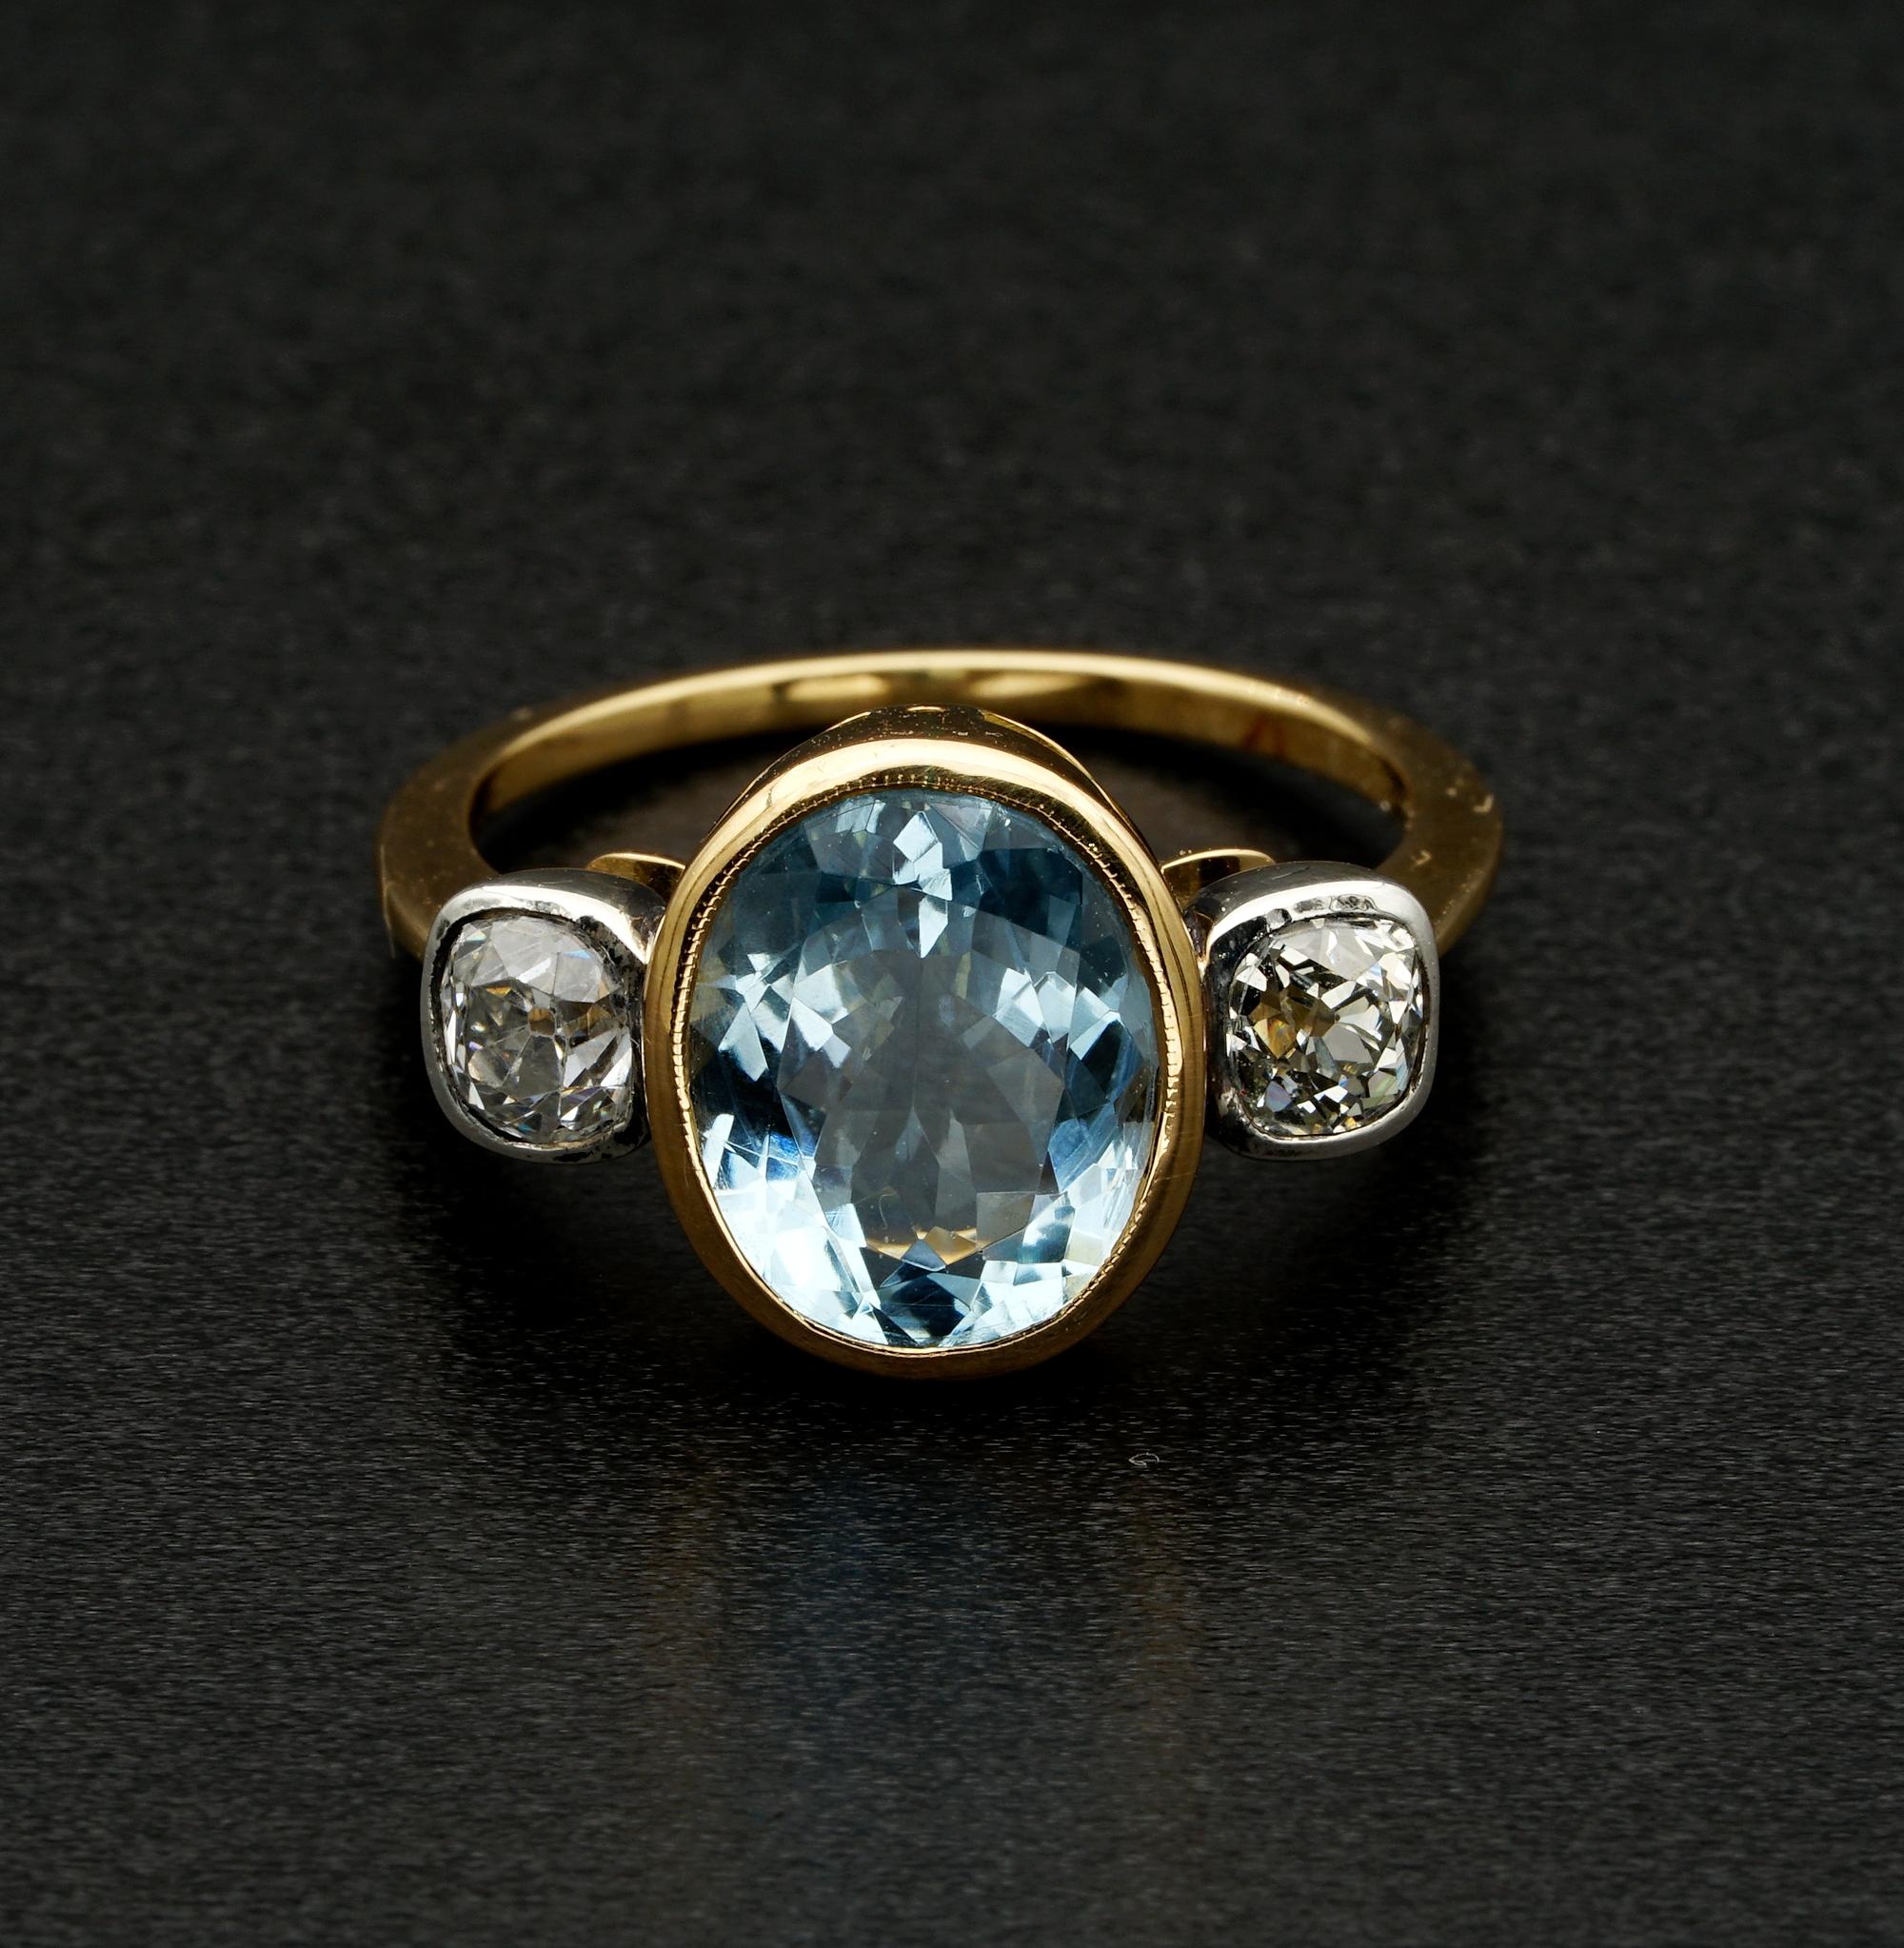 Sky Capture

This beautiful, Natural Aquamarine and Diamond Trilogy ring, is a vintage, classy version, good for engagement, anniversary or good companion to get on fingers
Dates late Deco period, most probably 1940 ca – hand crafted of solid 18 KT